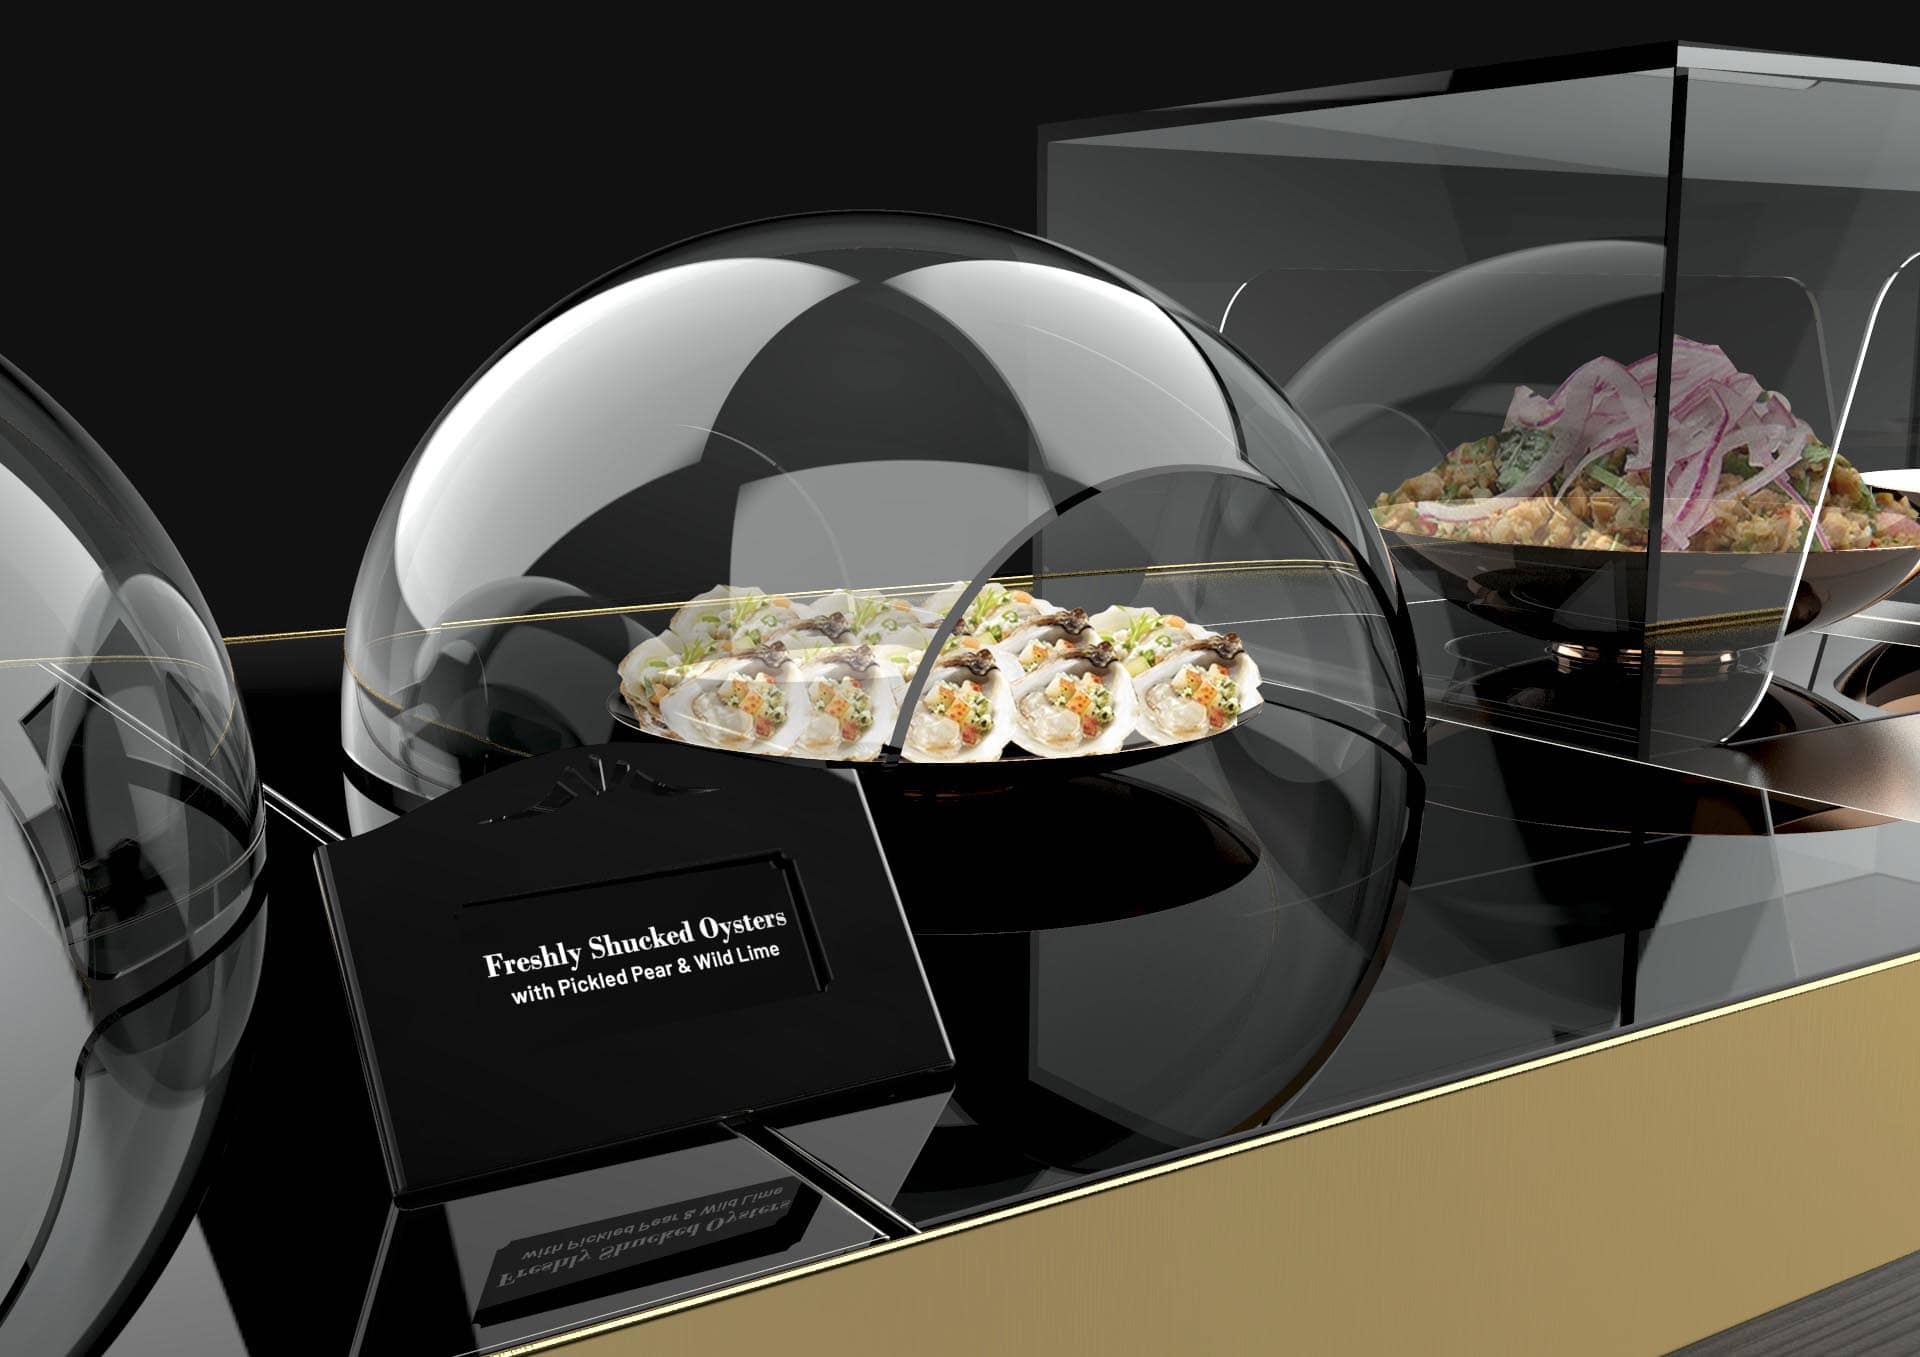 Image food shroud and guard, designed to protect integrity of food - from IHS Design - global designer and manufacturer of high-performing hospitality equipment and furnishings.